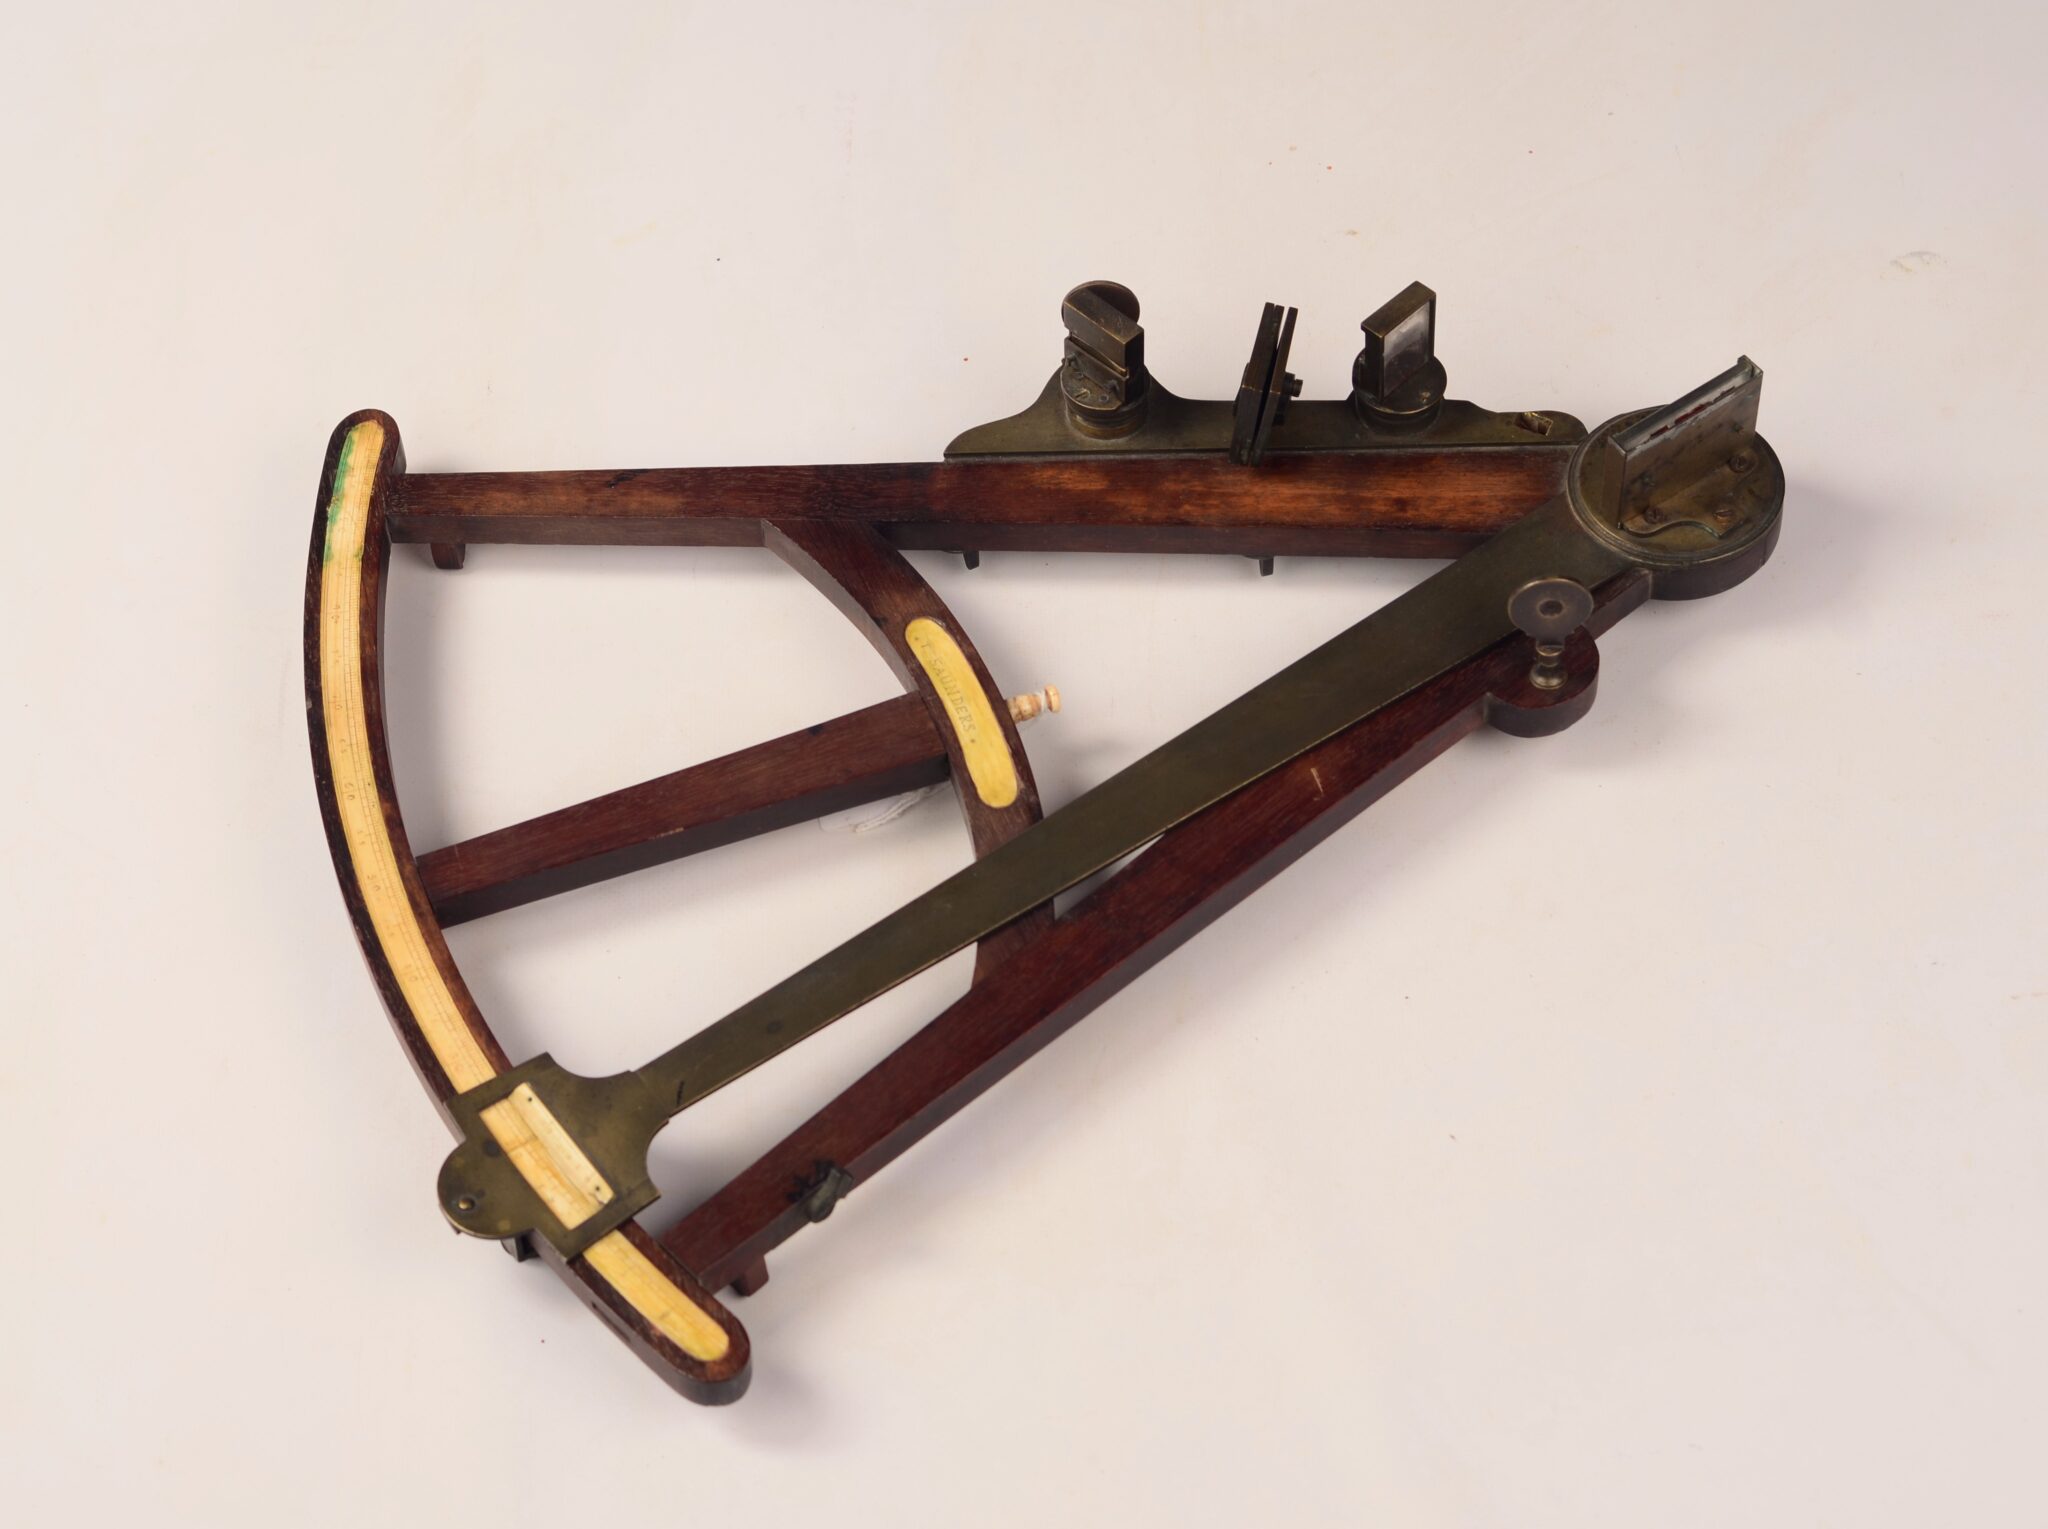 15-inch Octant owned by T. Saunders – 18th century